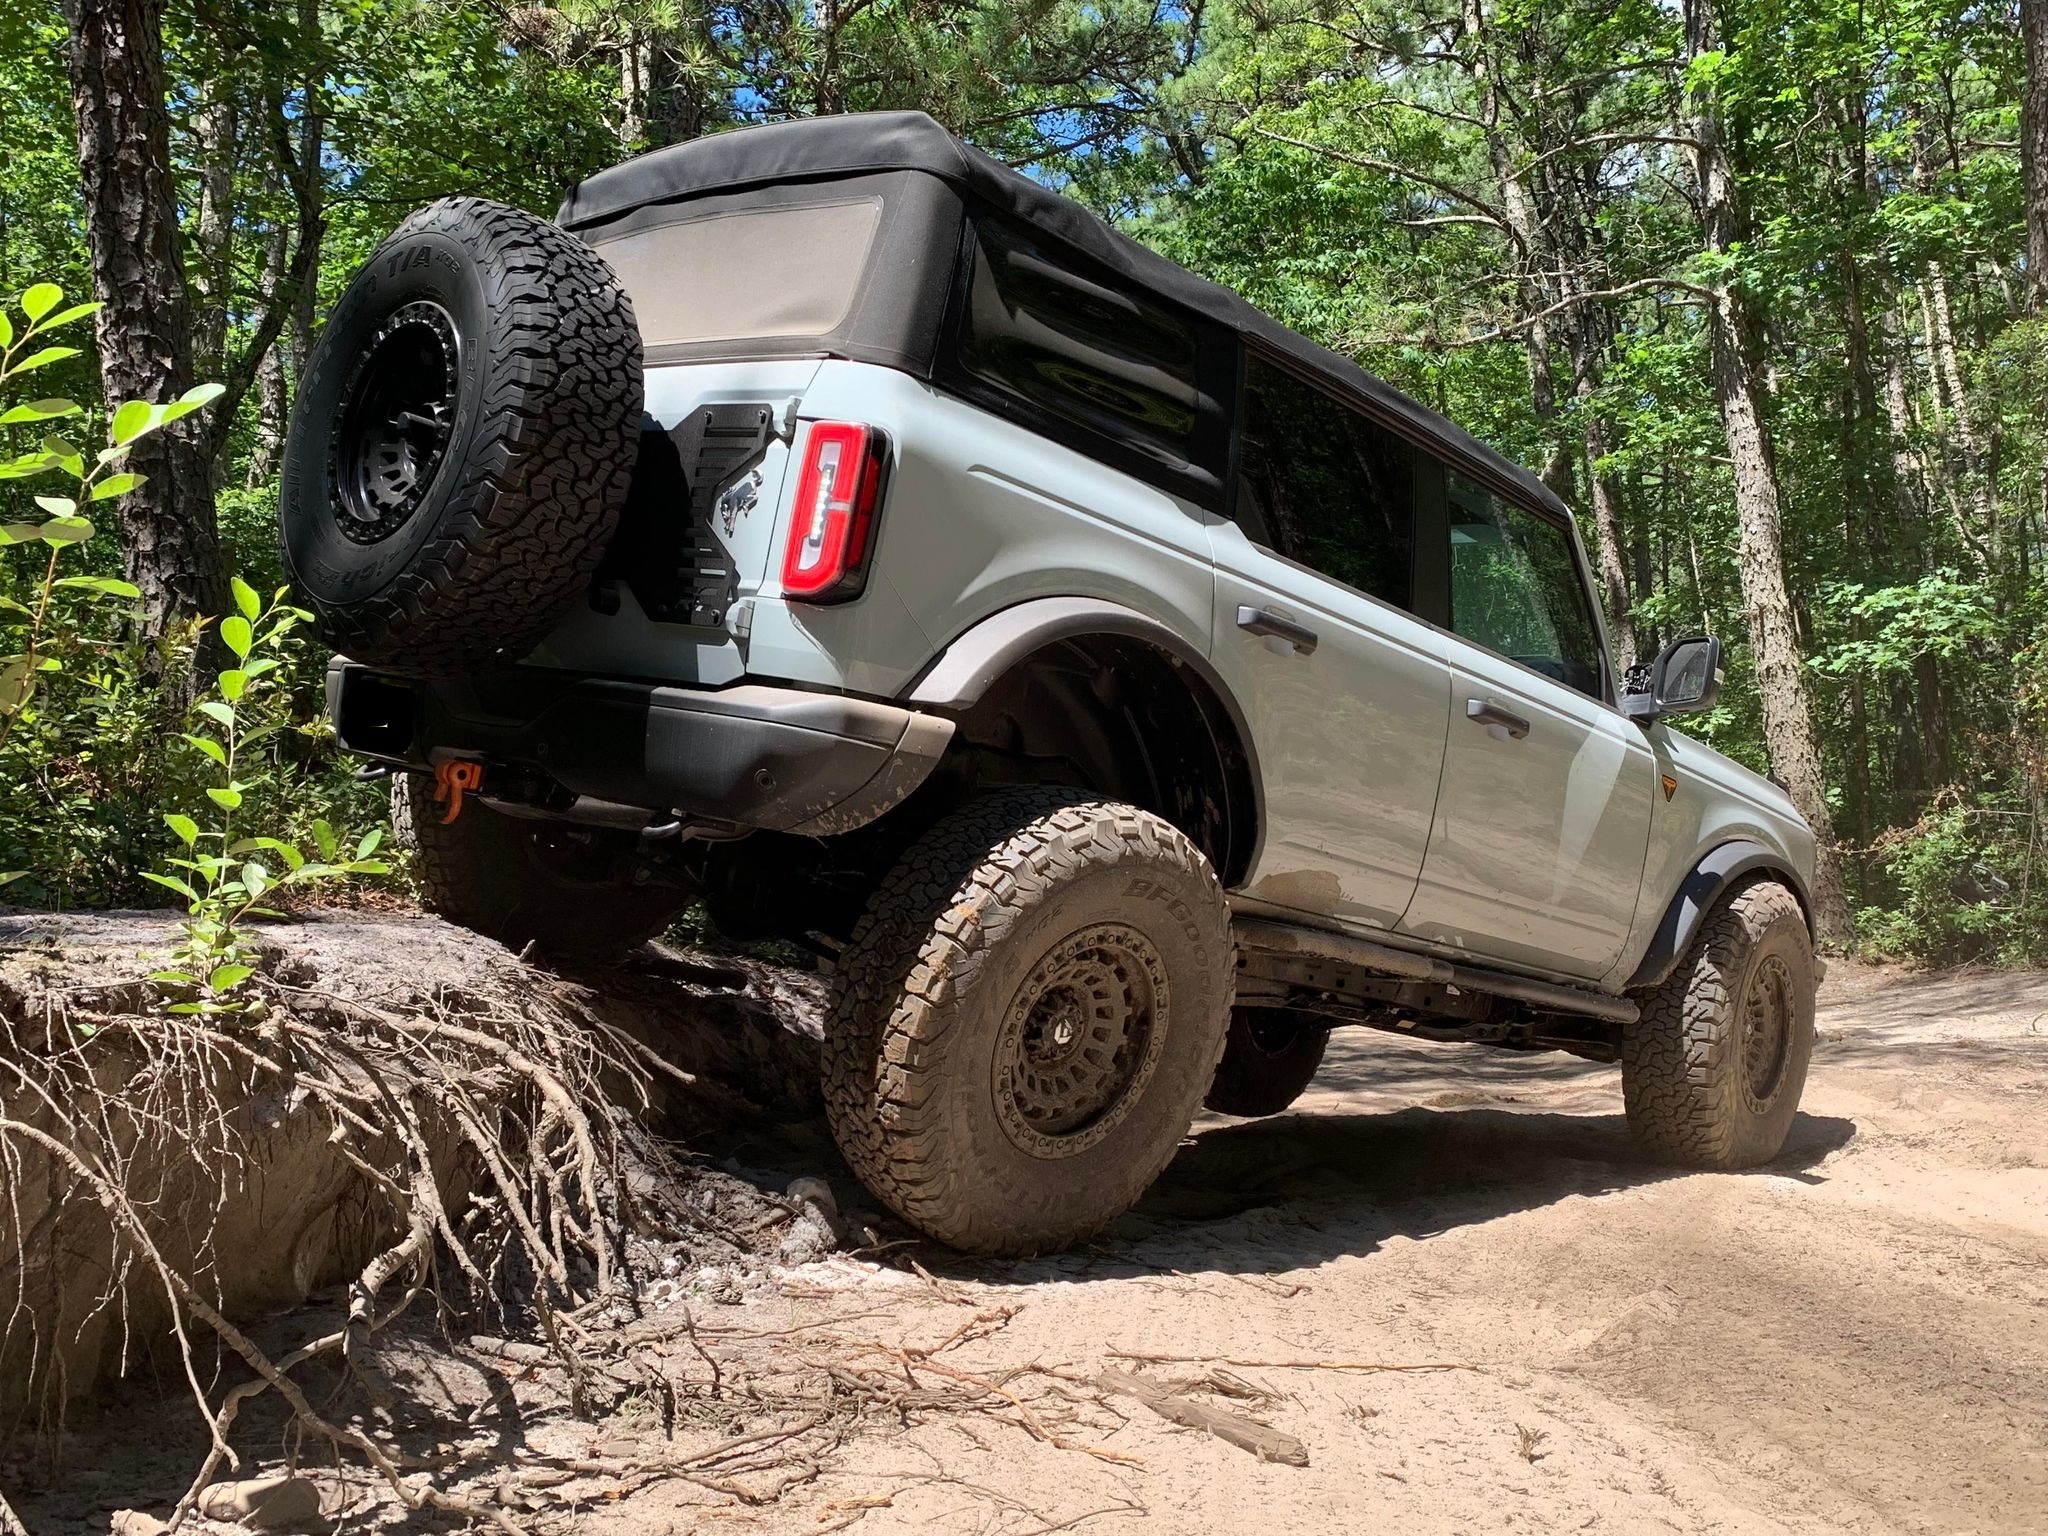 Ford Bronco 37" Tires on a Non-Sasquatch Badlands - My Experience, Results, Pics 295421994_1289937878482328_5772480620113487925_n (2)